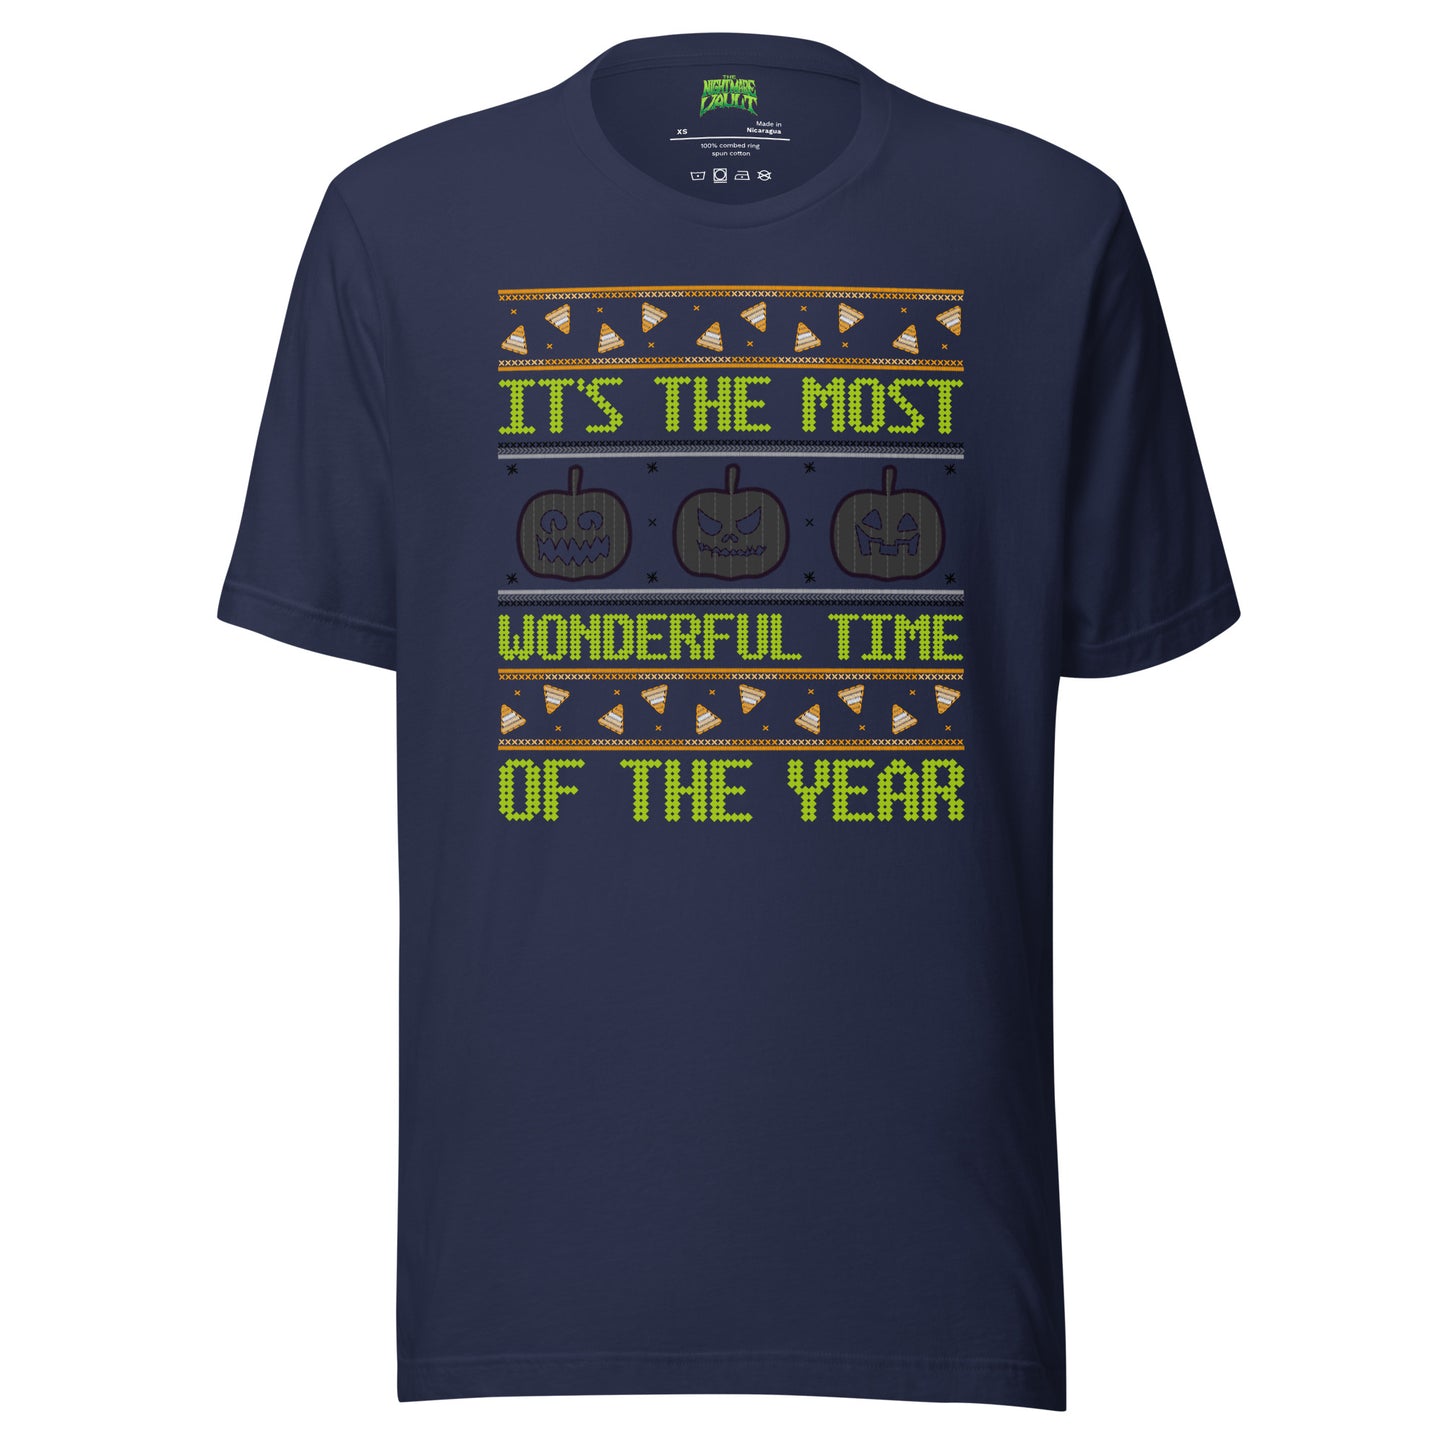 It's the Most Wonderful Time of the Year tee